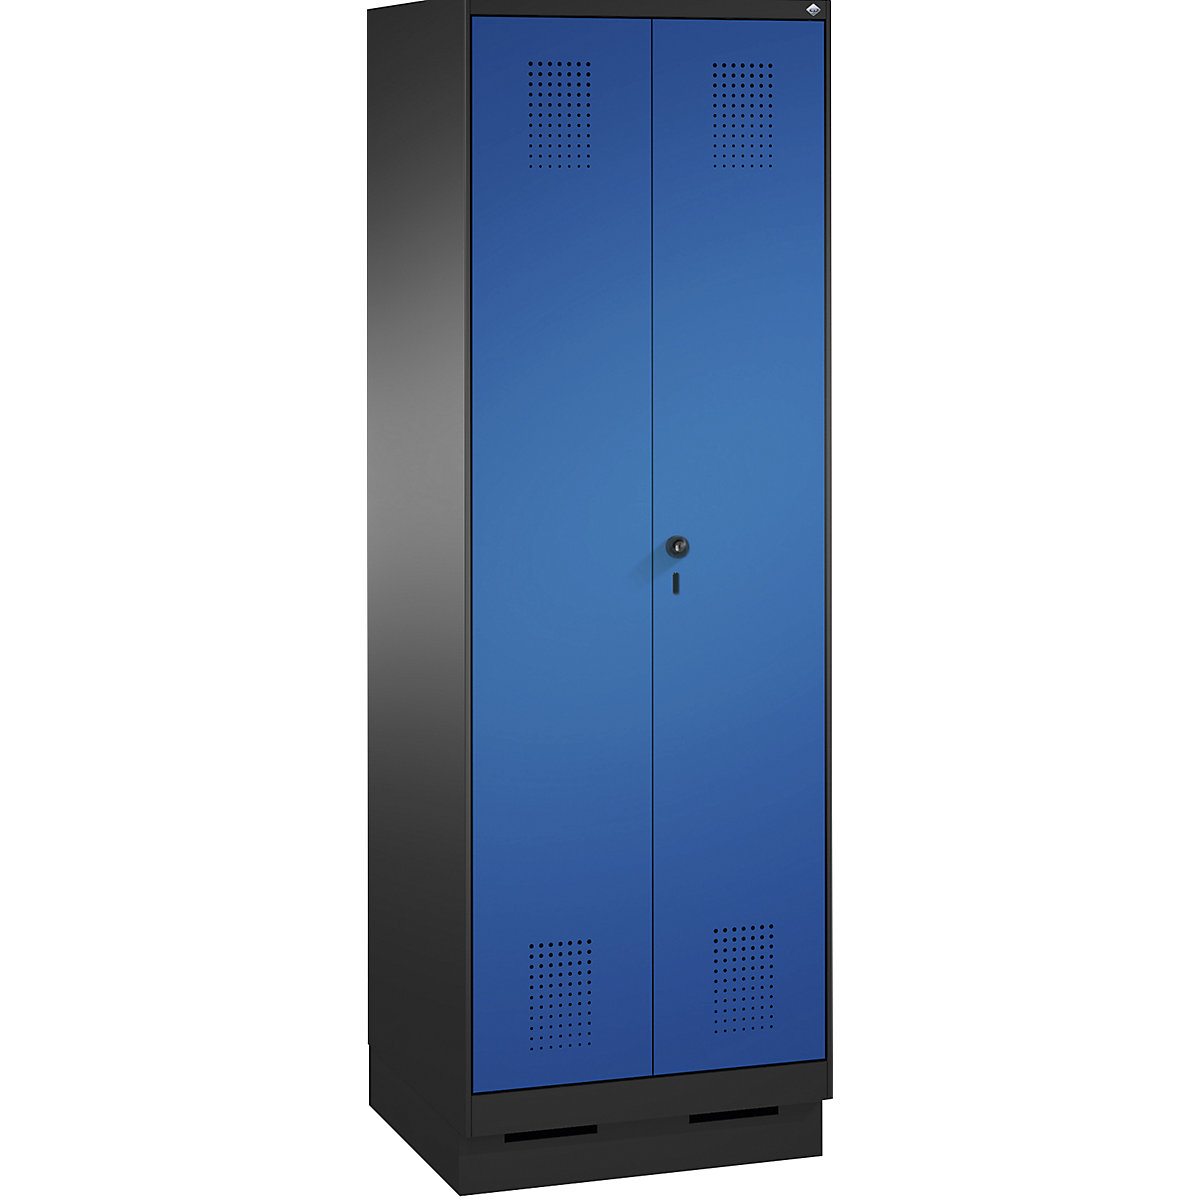 EVOLO cloakroom locker, doors close in the middle – C+P, 2 compartments, compartment width 300 mm, with plinth, black grey / gentian blue-11